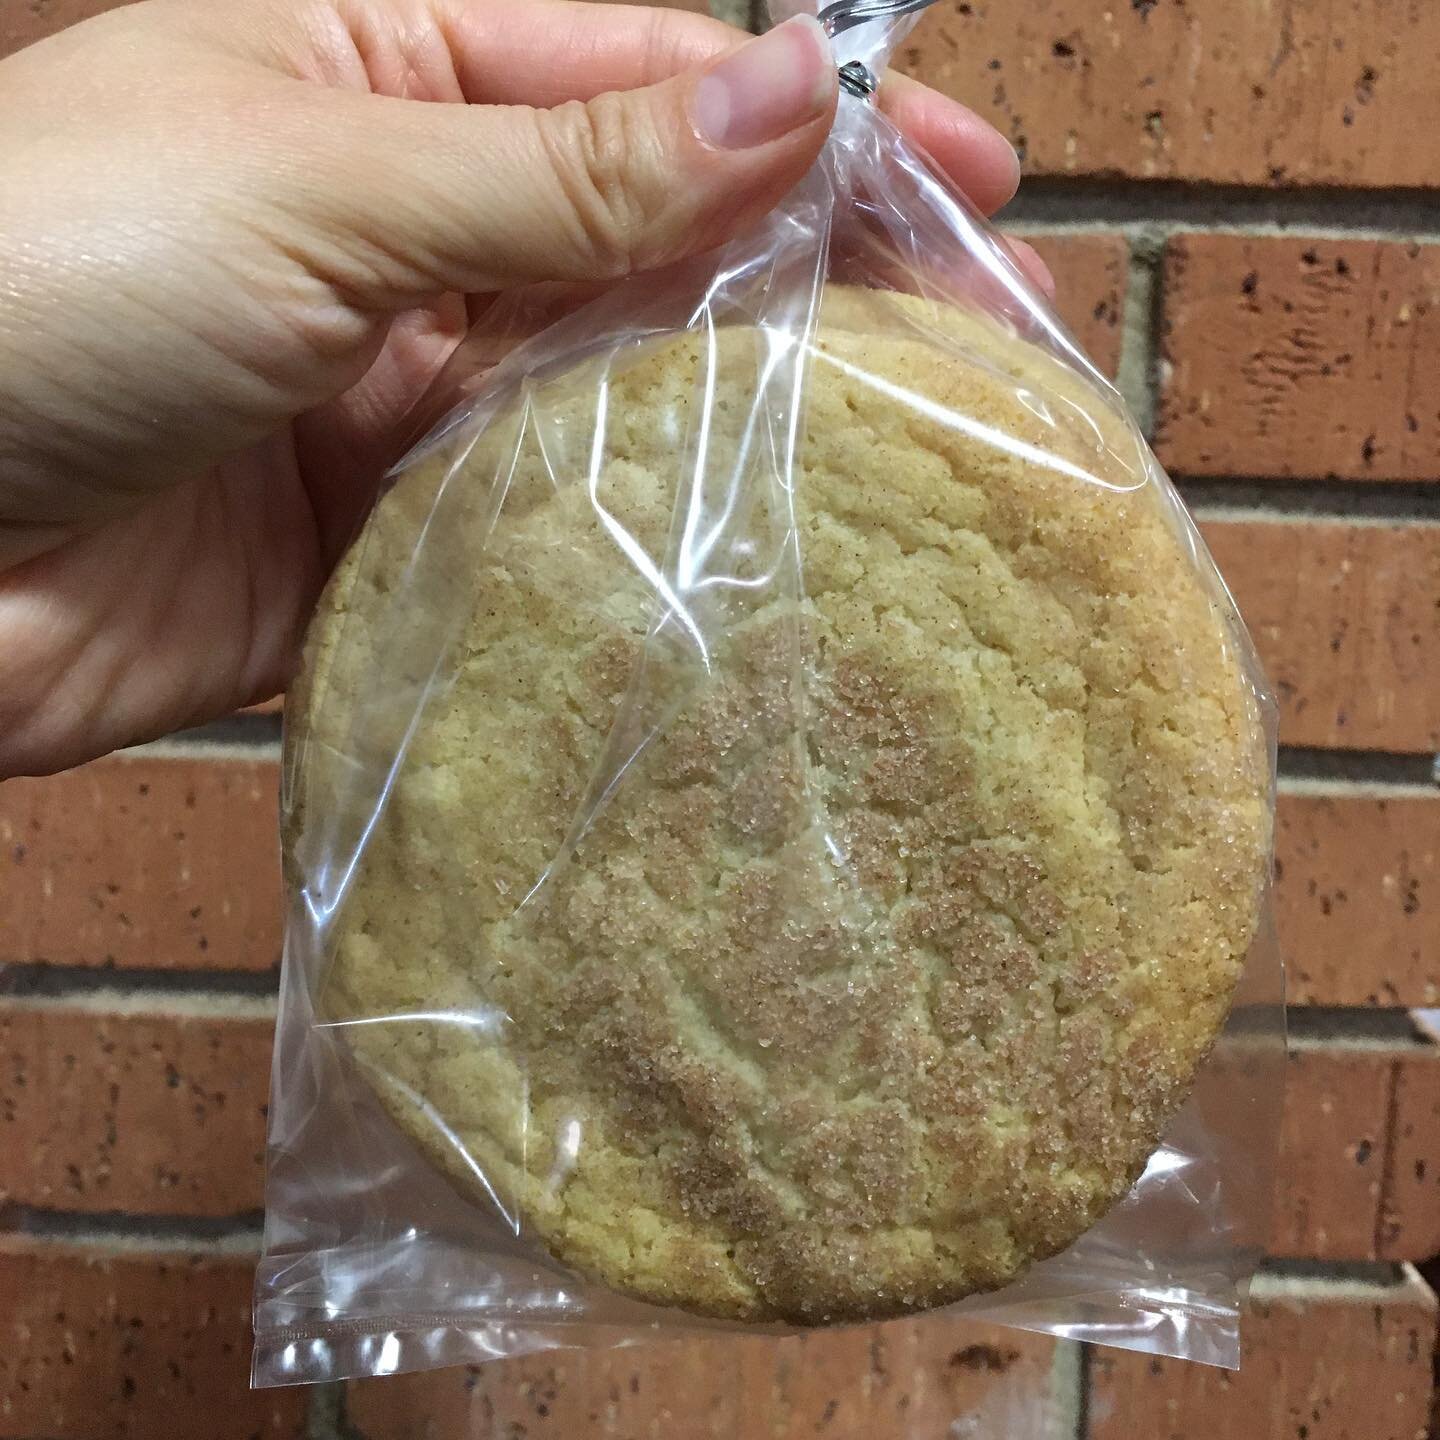 Fresh snickerdoodle cookies are in stock! See our story for specials and sides. Open Monday-Friday from 11am-3pm.
.
.
.
#backstreet #backstreetcafe #backstreetsinton #monday #sugarrush #homemade #cookies #yummy